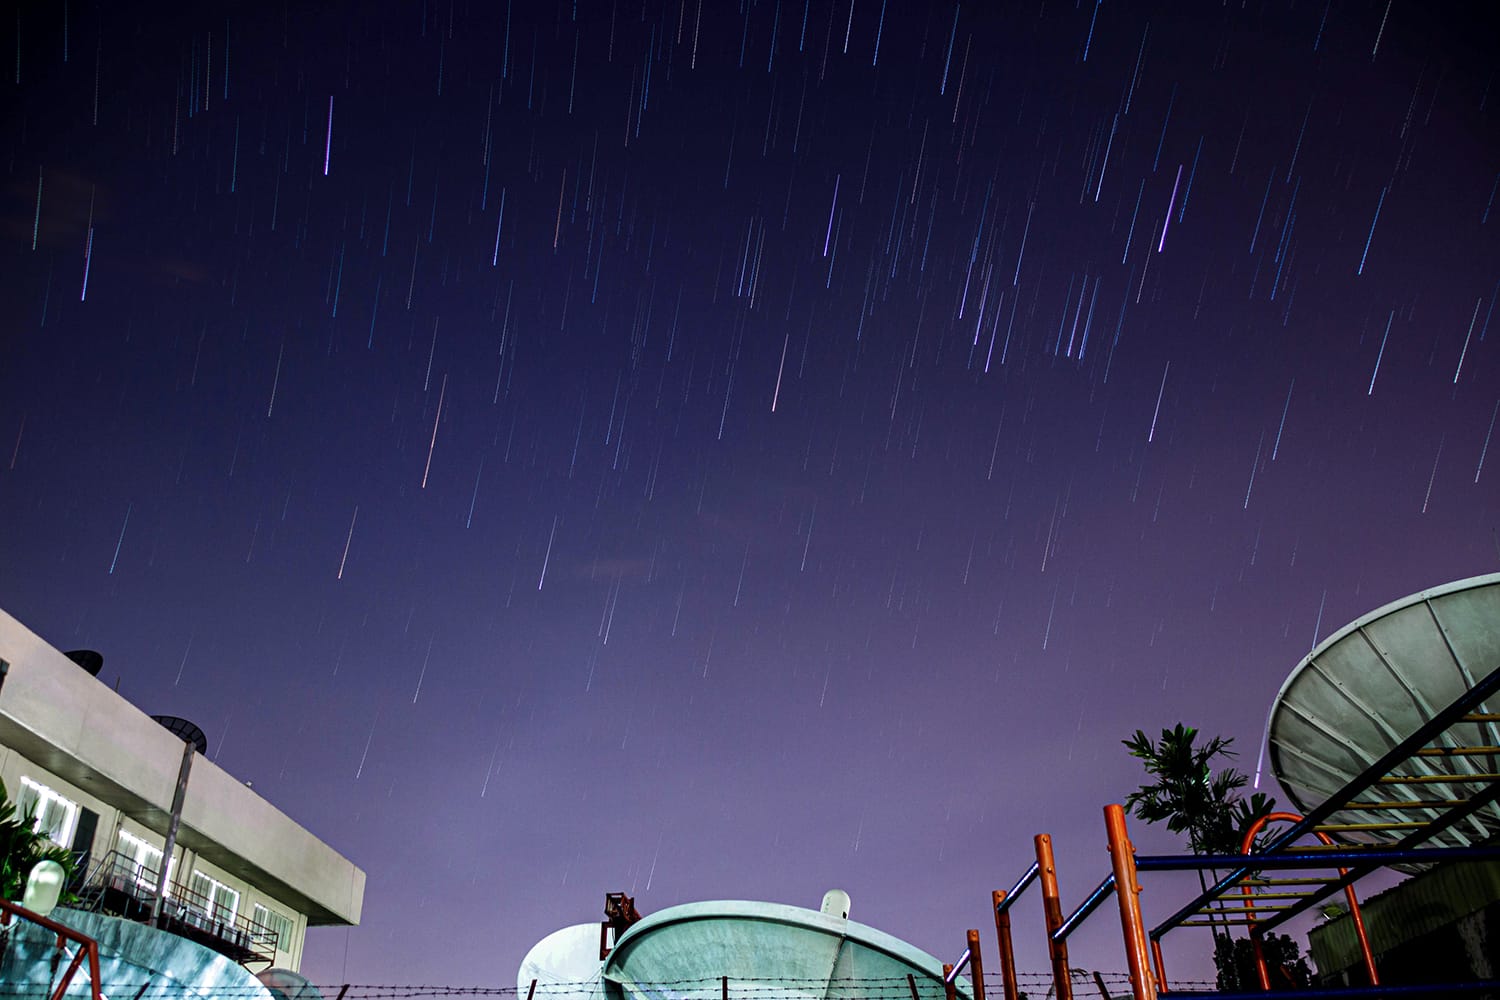 How to Shoot Incredible Star Trail Photographs